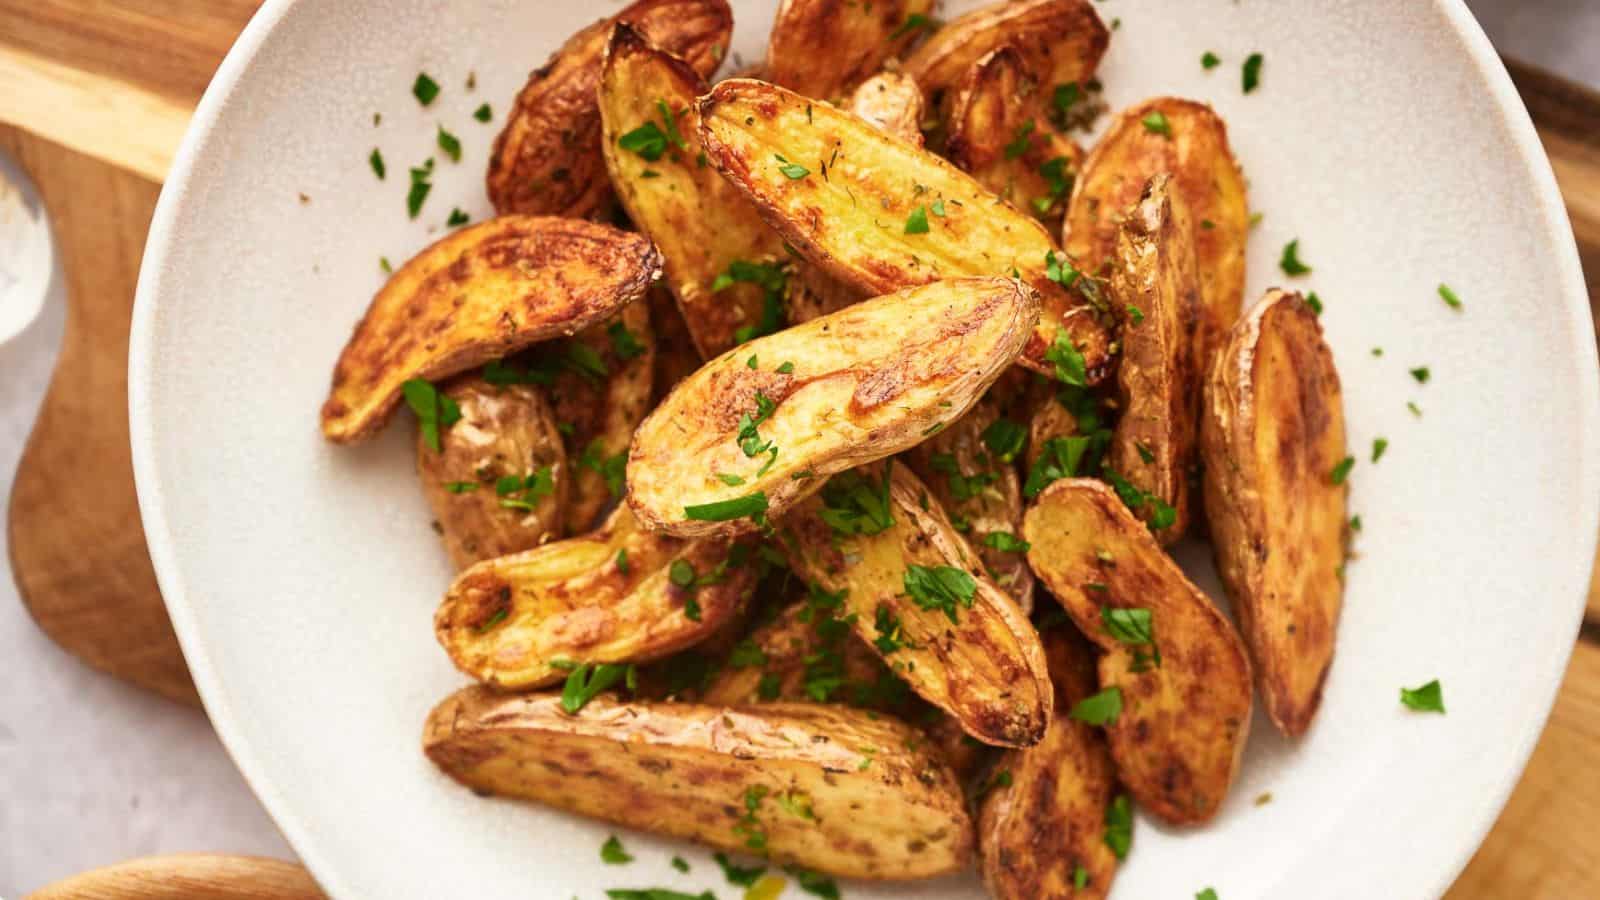 <p>Enjoy perfectly crispy potatoes without the deep frying. Air Fryer Fingerling Potatoes are simple to prepare and can be a favorite addition to any meal.<br><strong>Get the Recipe: </strong><a href="https://www.splashoftaste.com/air-fryer-fingerling-potatoes/?utm_source=msn&utm_medium=page&utm_campaign=msn">Air Fryer Fingerling Potatoes</a></p>